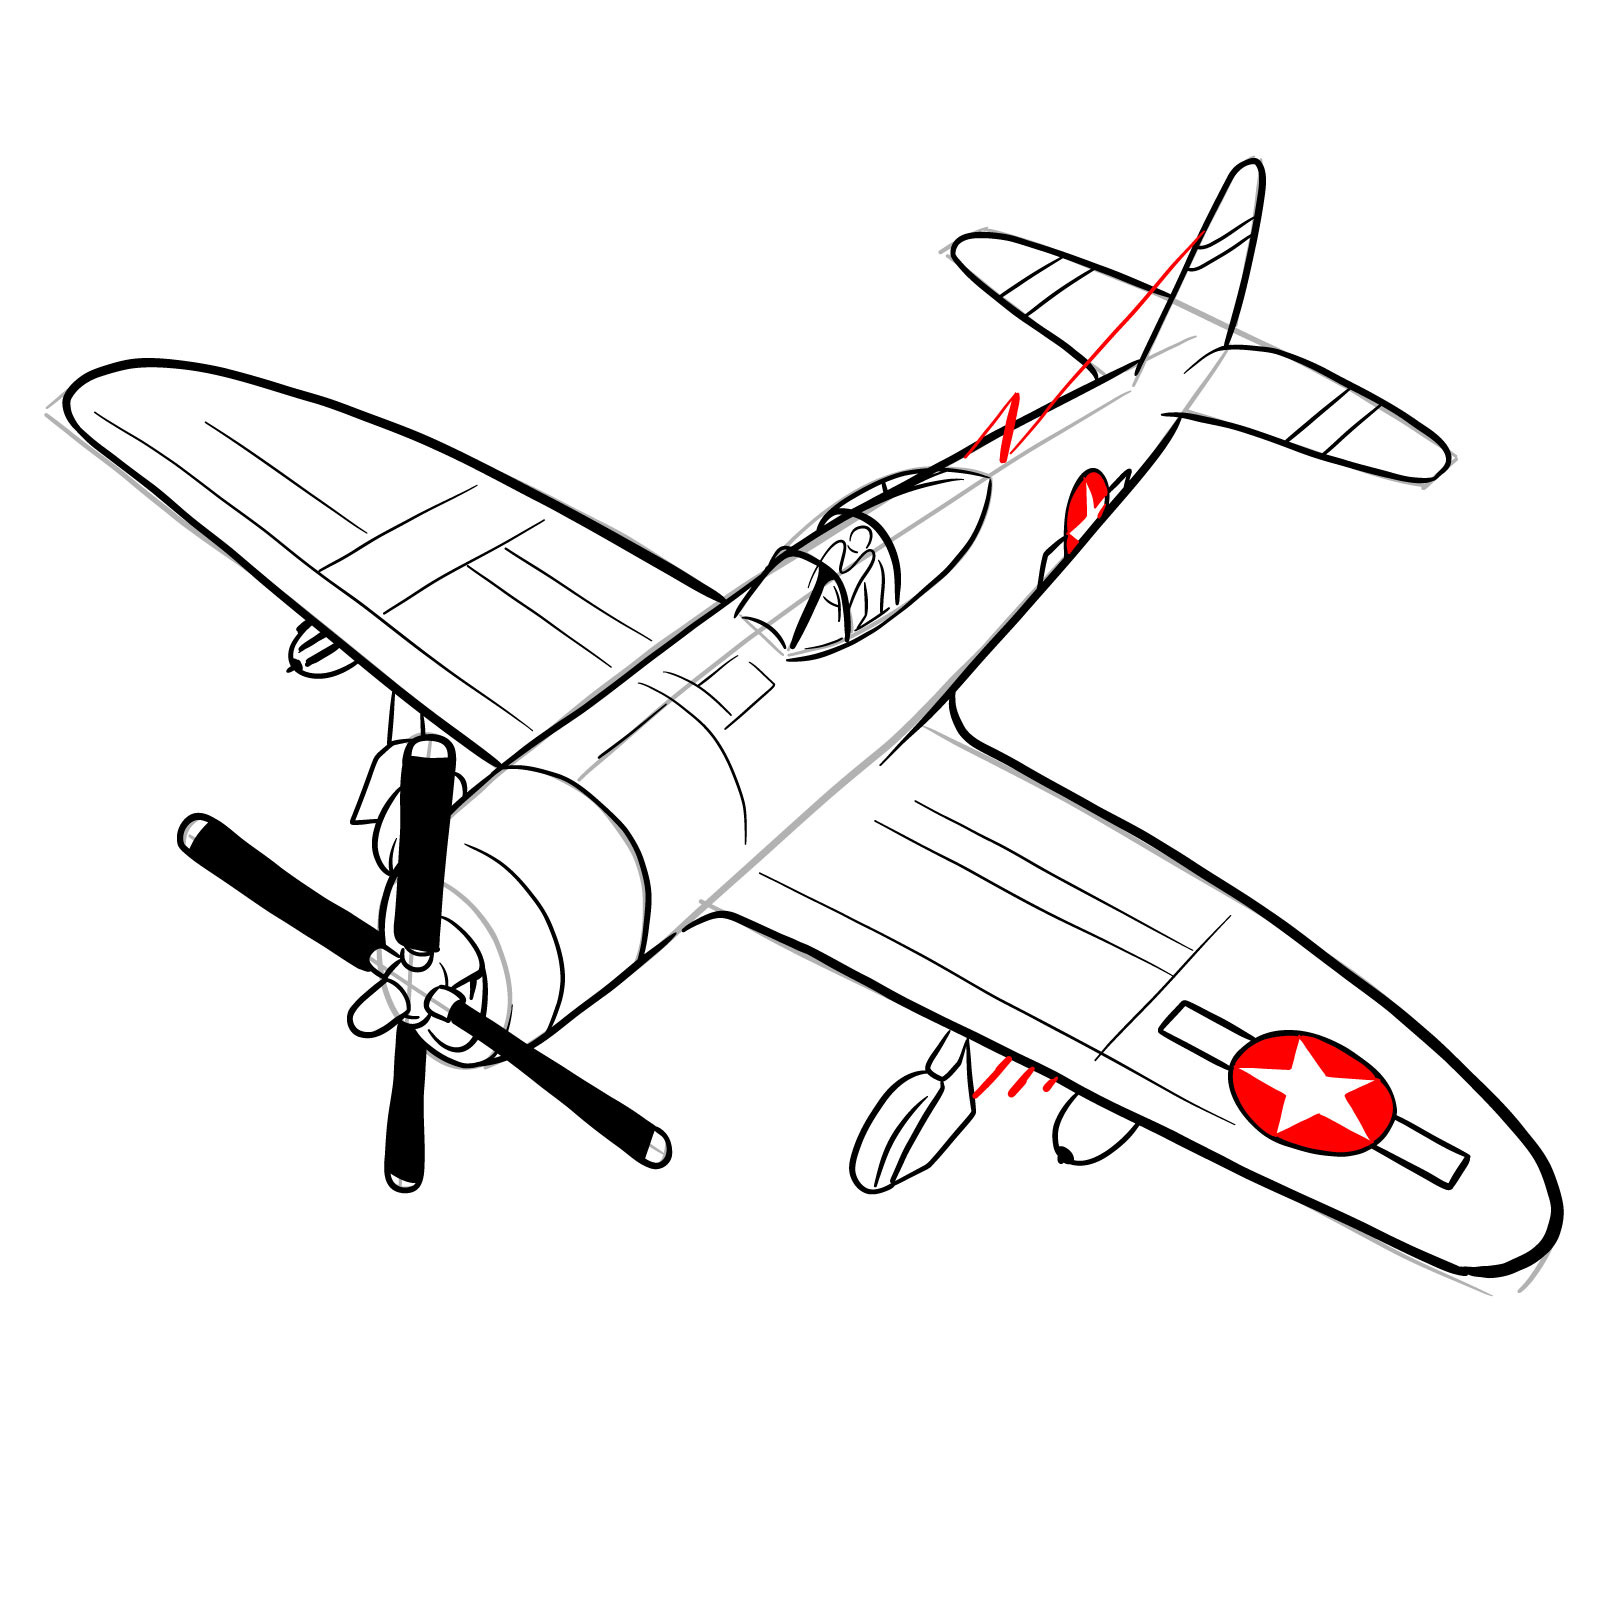 How to draw the Republic P-47 Thunderbolt - step 27